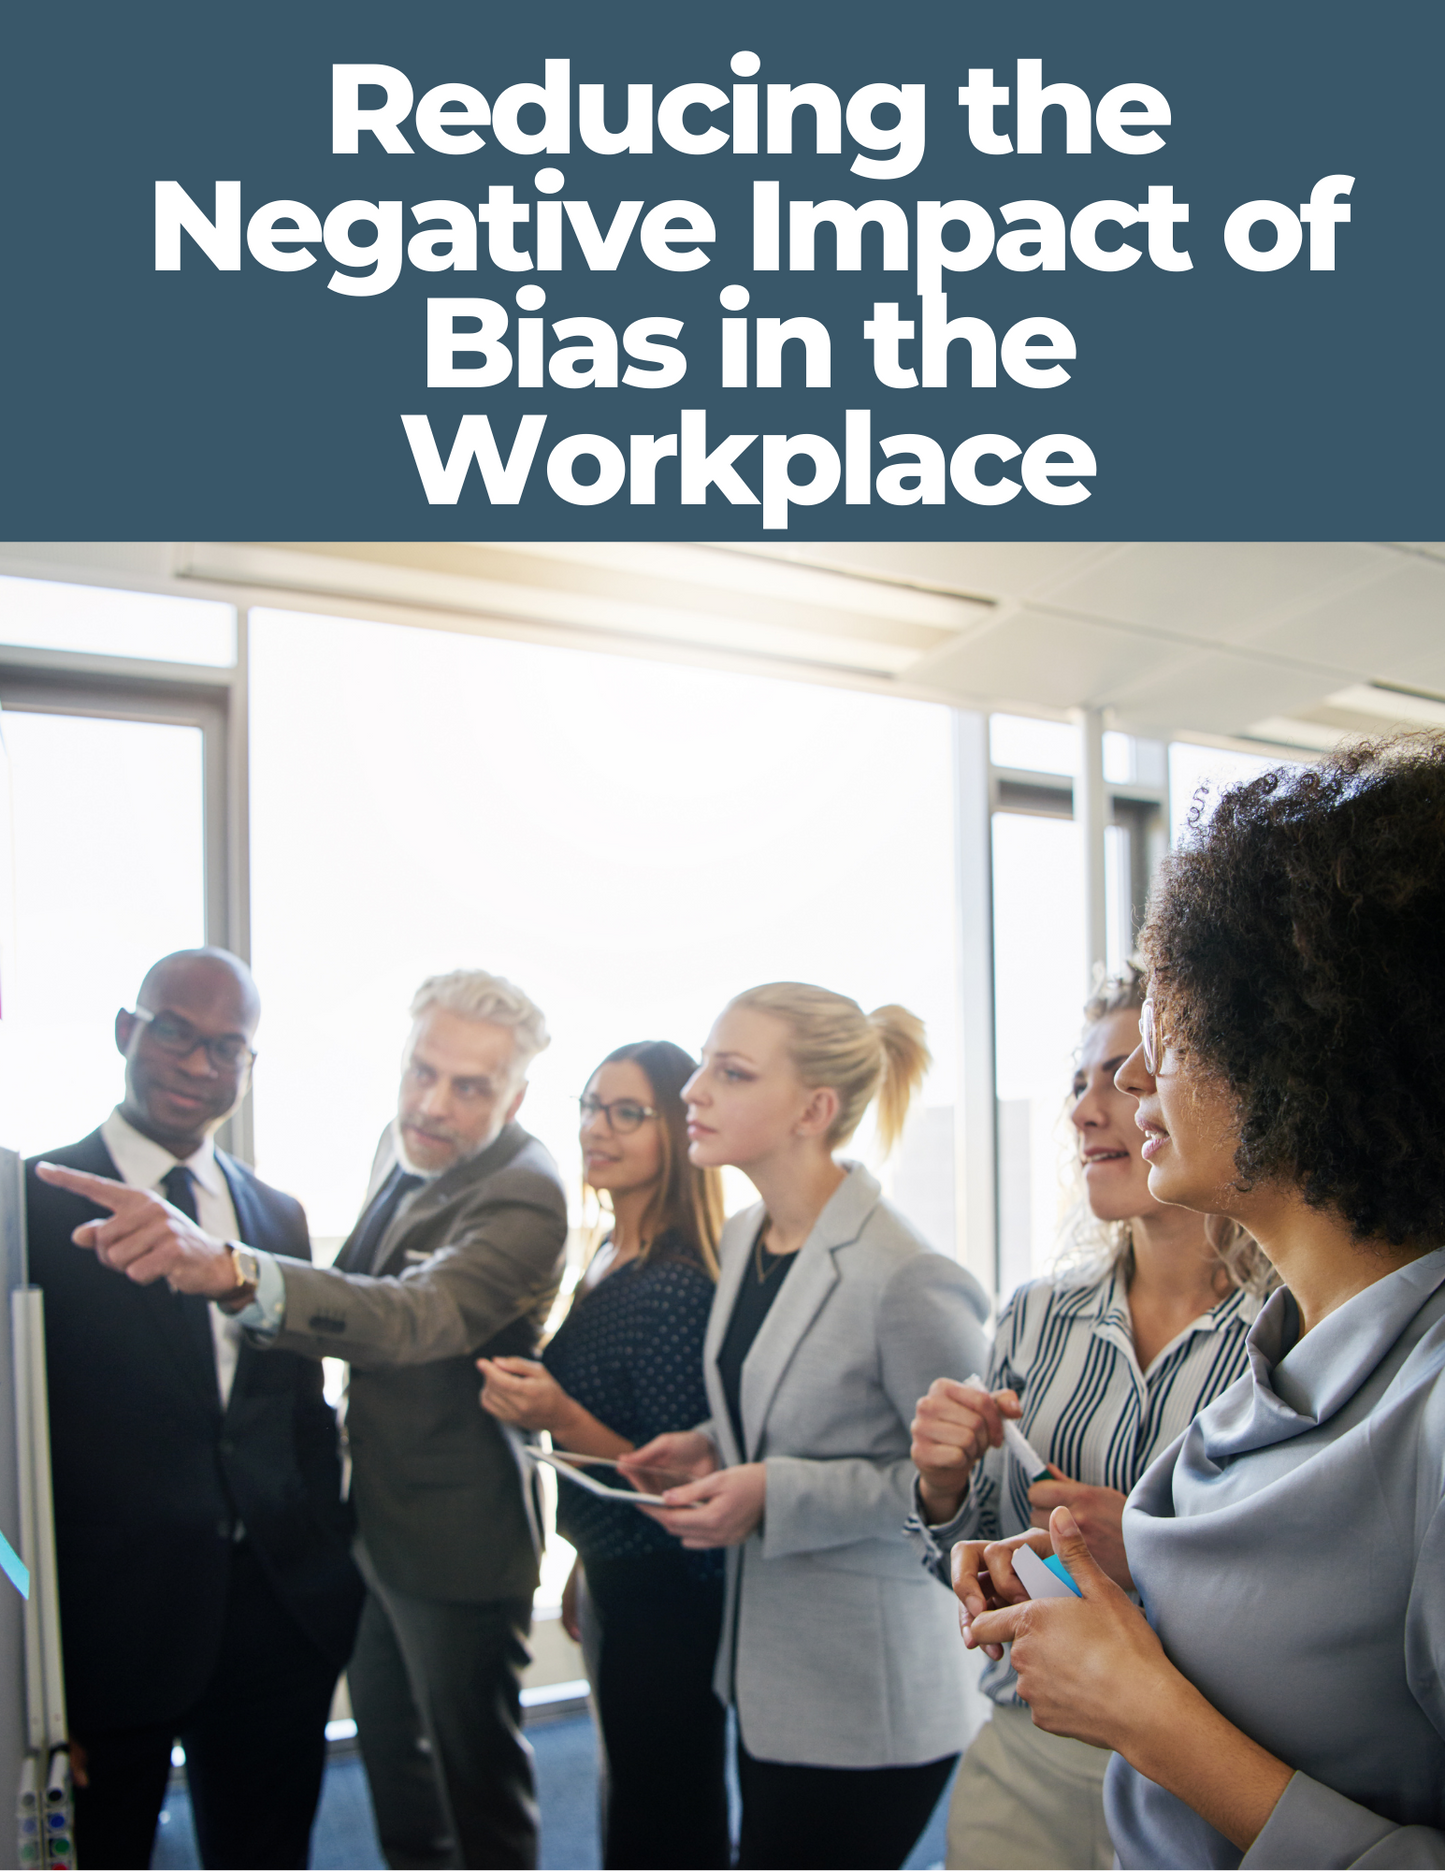 Reducing the Negative Impact of Bias in the Workplace